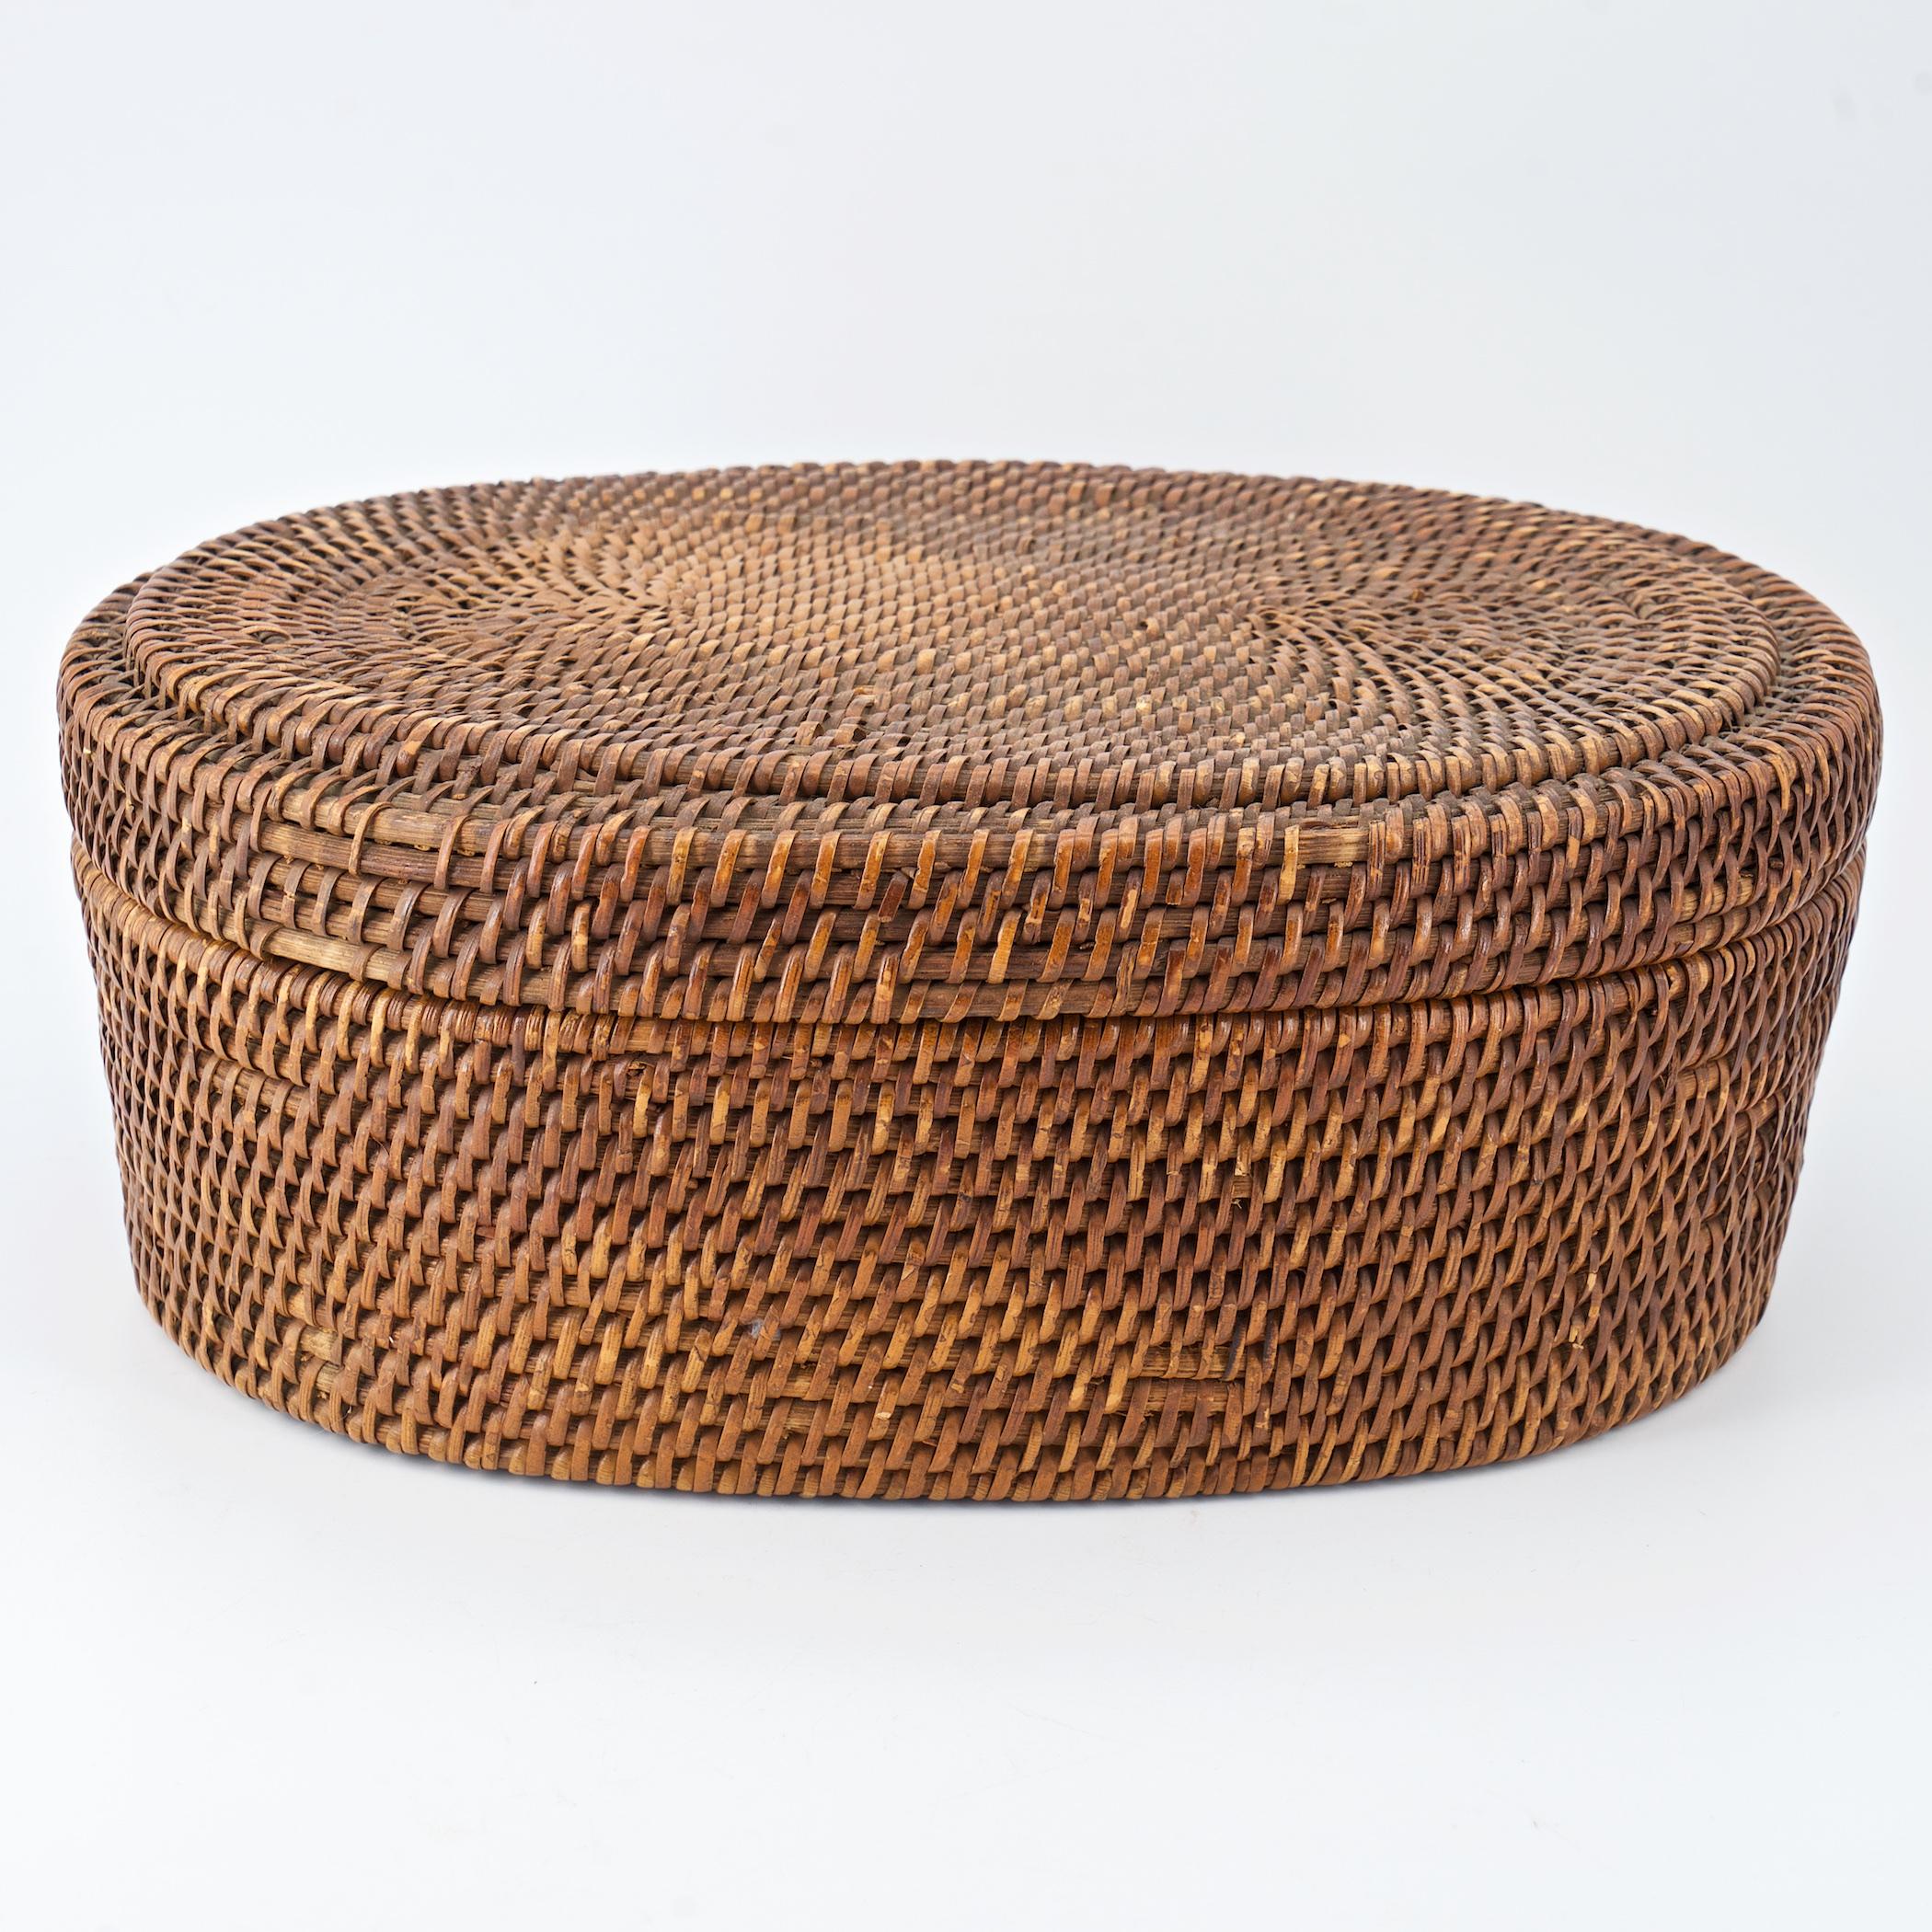 From a Washington D.C. collectors estate. Early 20th century basket, but definitive information about time period or maker remains unknown.